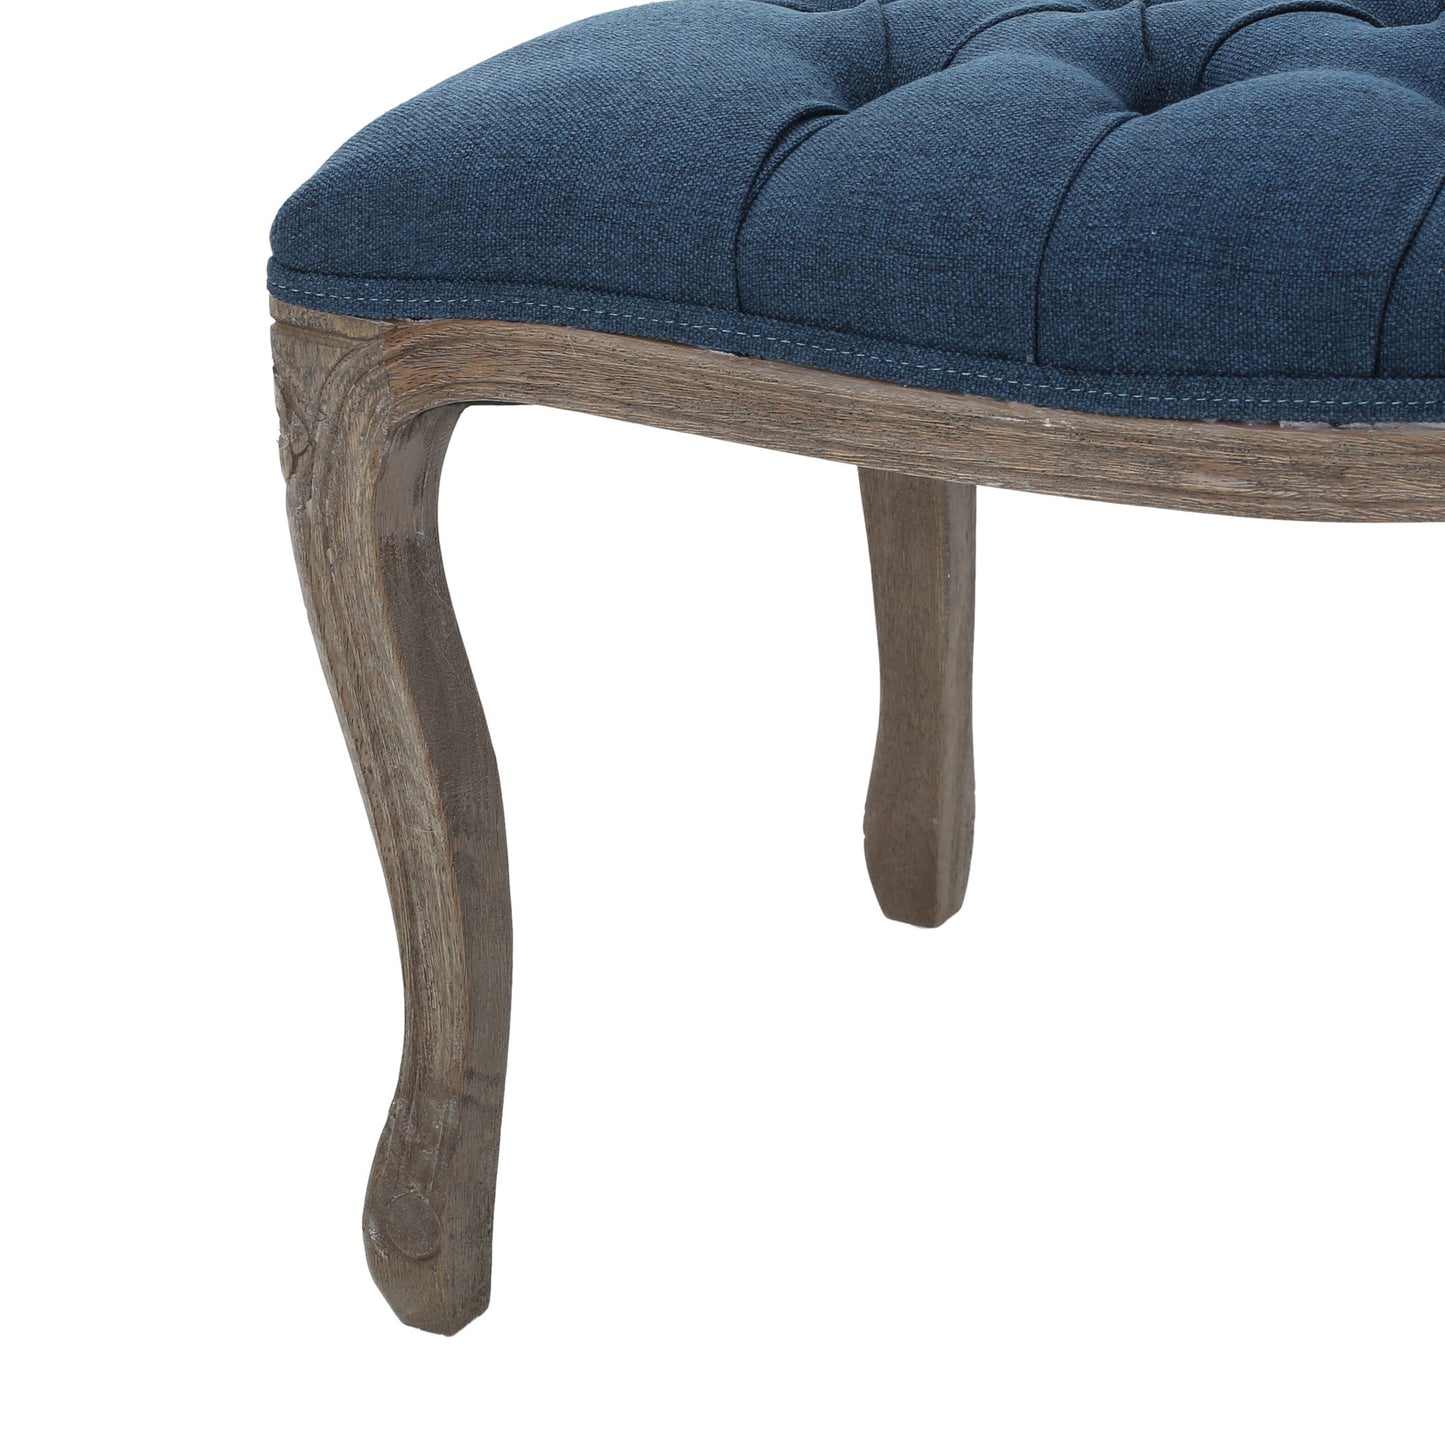 Tasette Traditional Button Tufted Fabric Bench